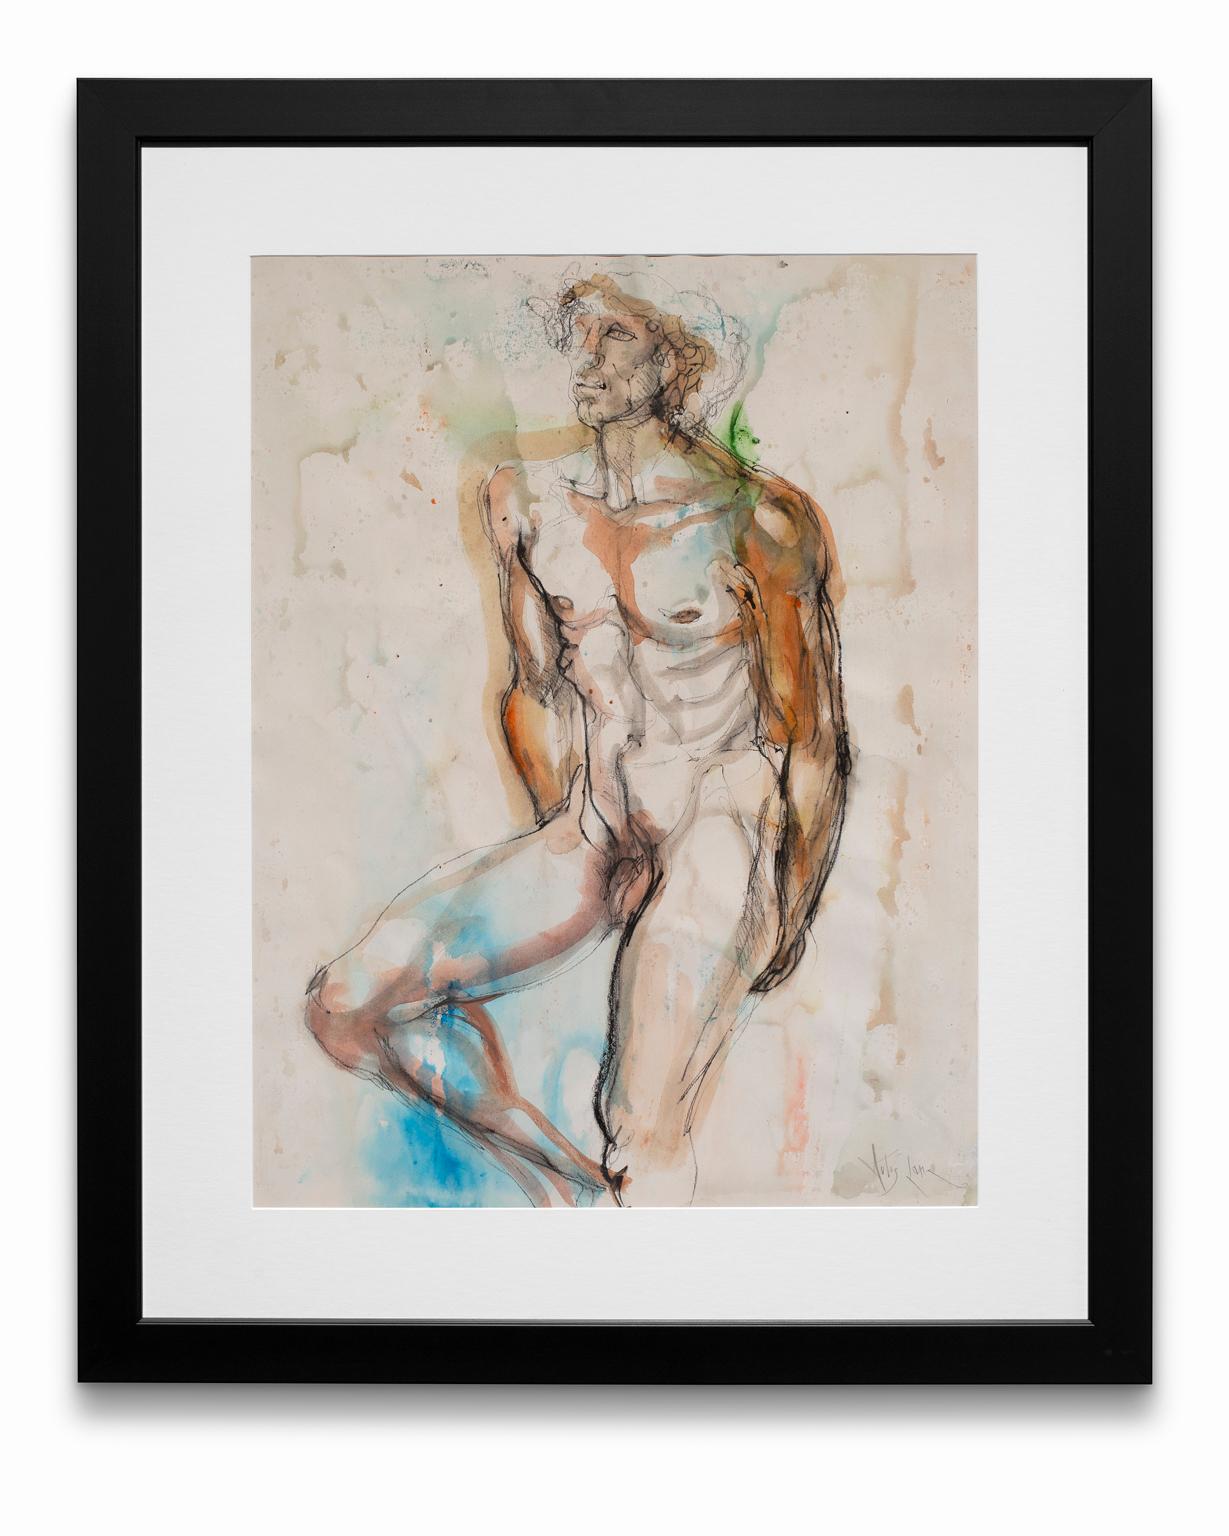 "Nude Male #2", Watercolor and Charcoal on Paper